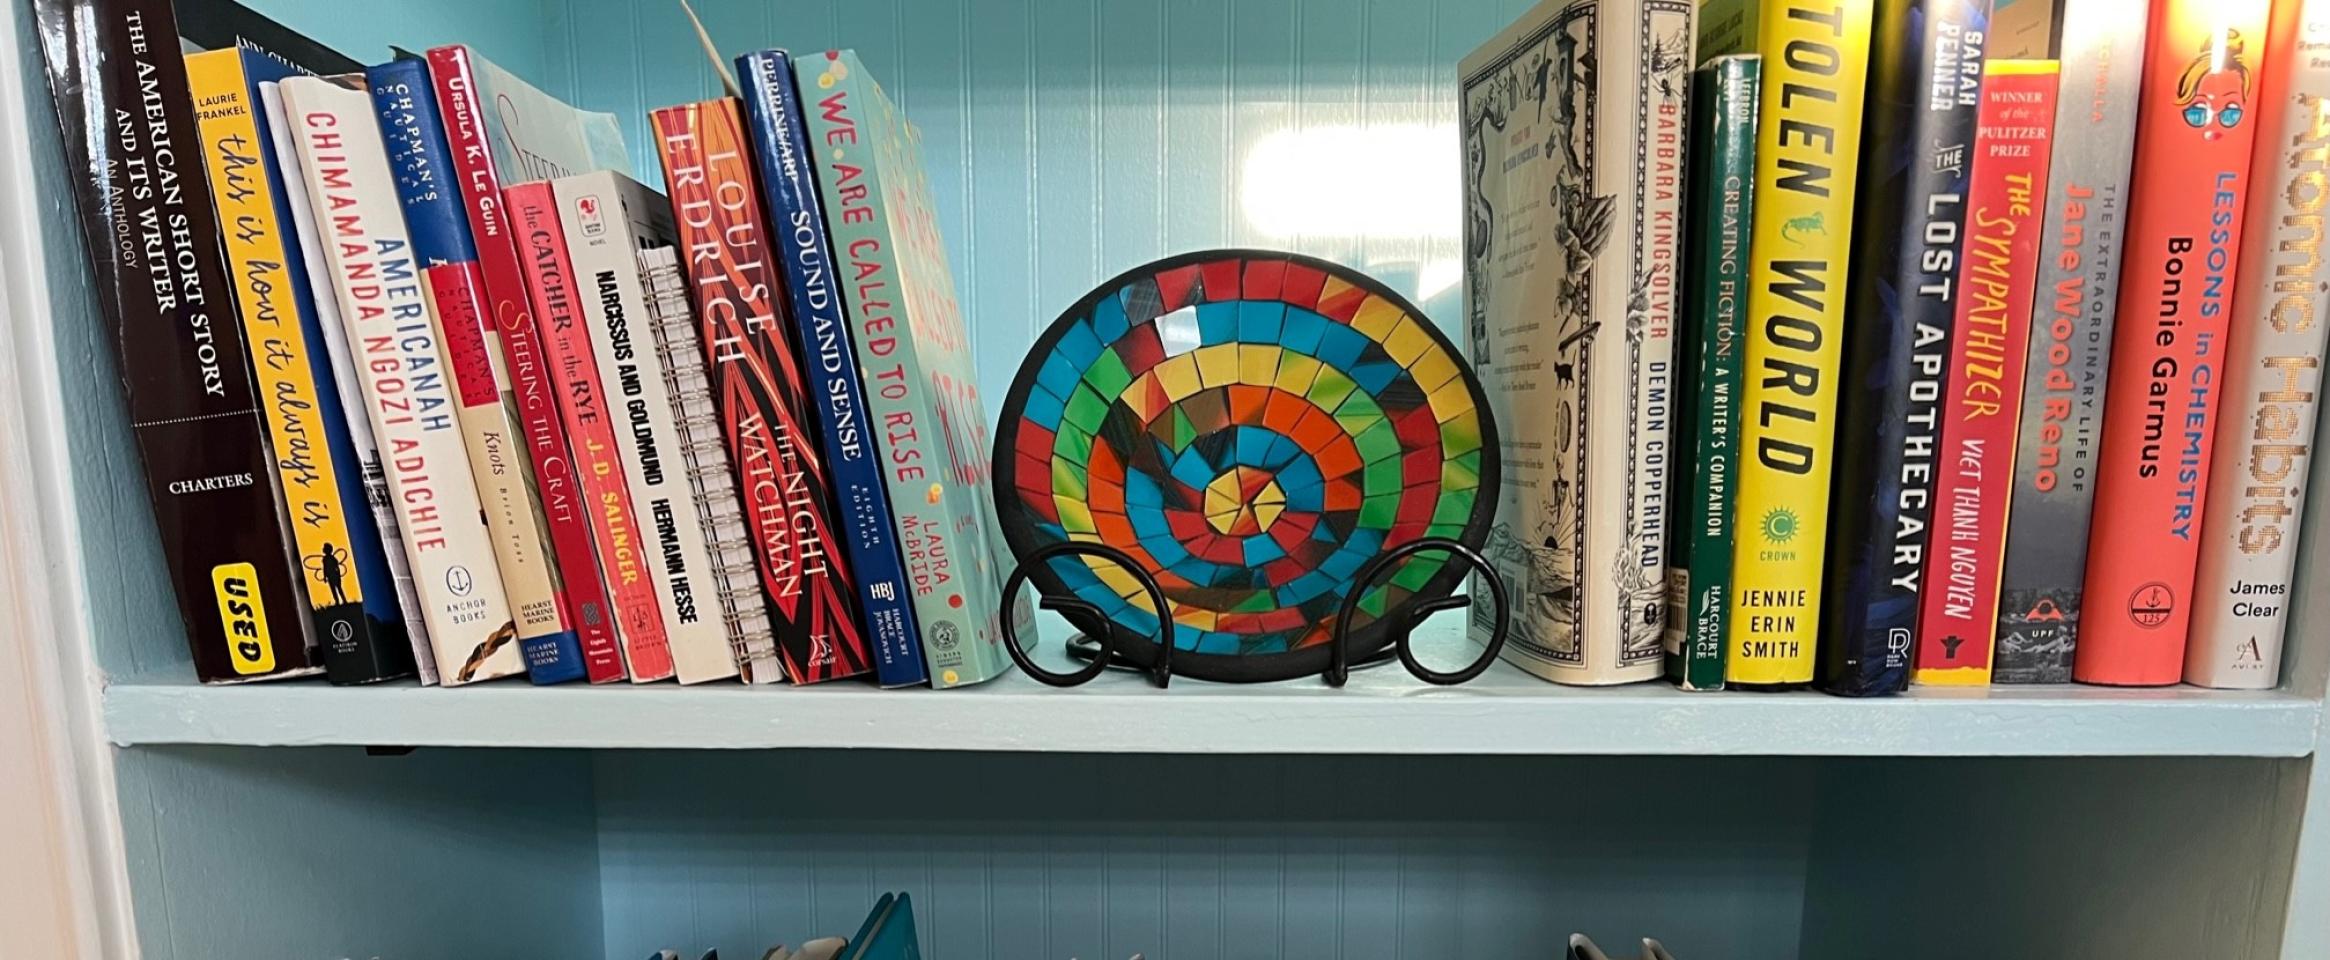 Rectangular photo of Ginger Pinholster’s office bookshelf containing a variety of narratives by and about people living on the edges of society, including some with mental illness. Photo credit Ginger Pinholster.